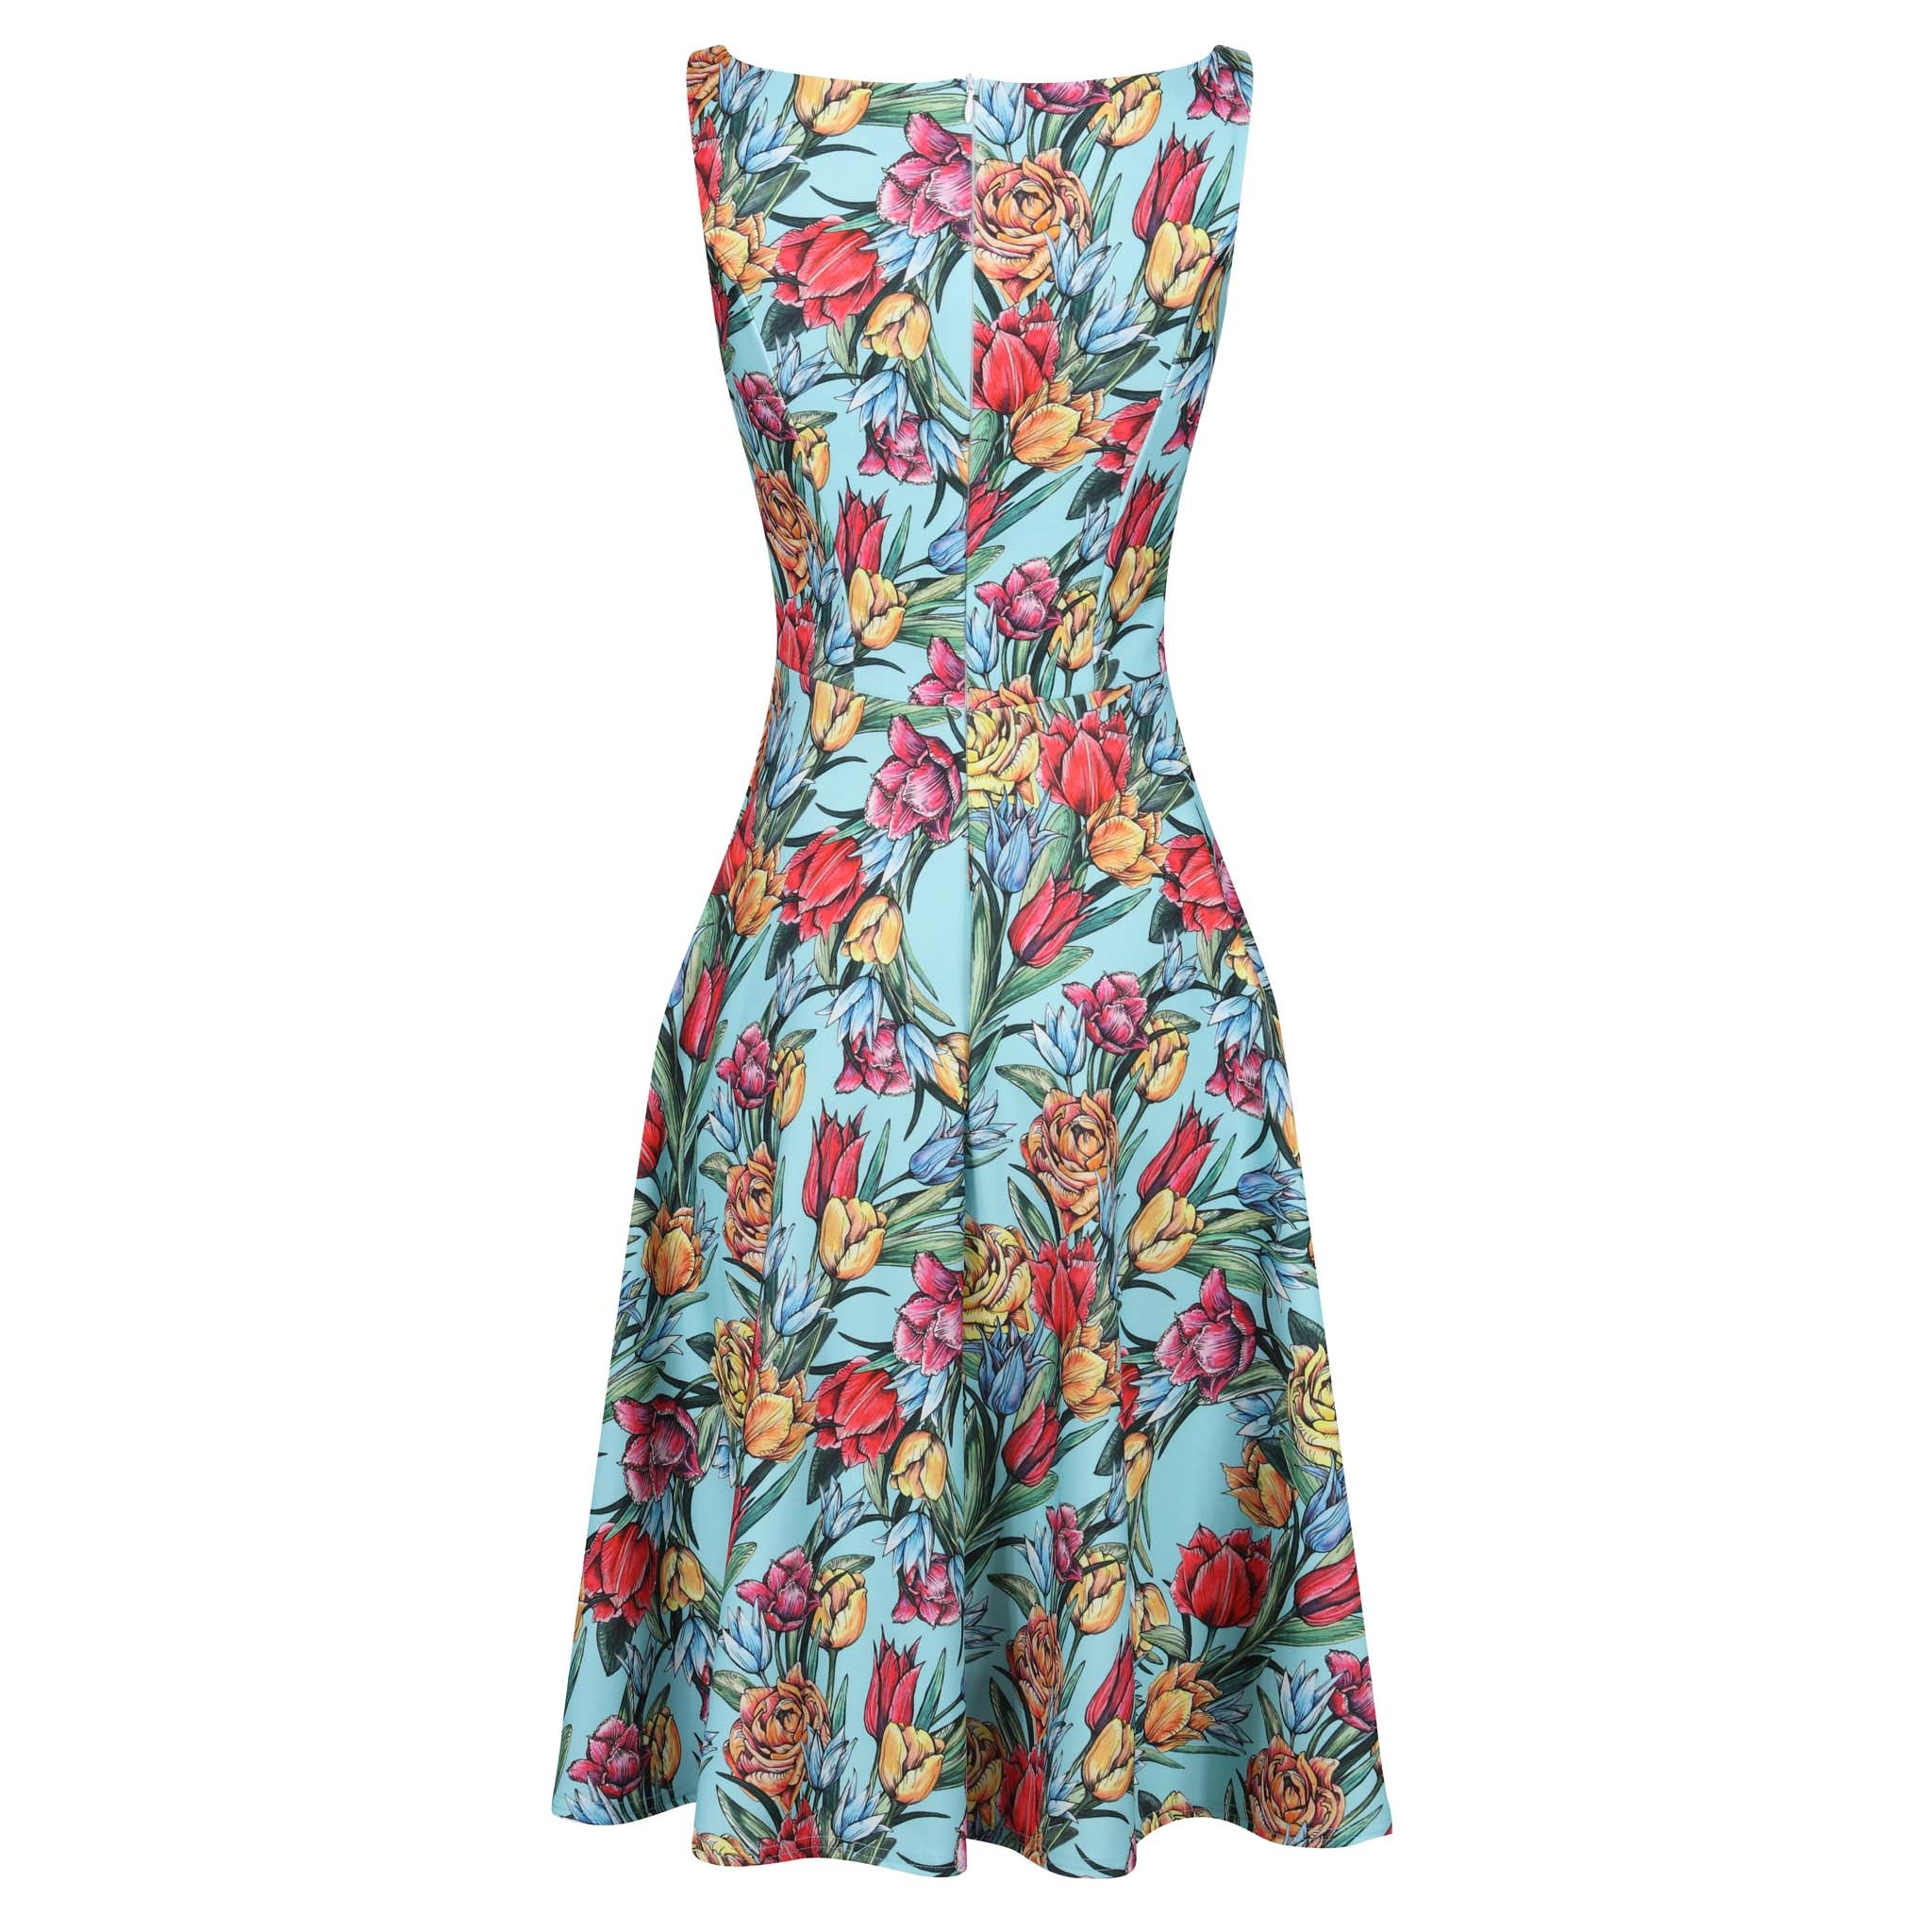 Turquoise Floral Print Audrey Style 1950s Swing Dress